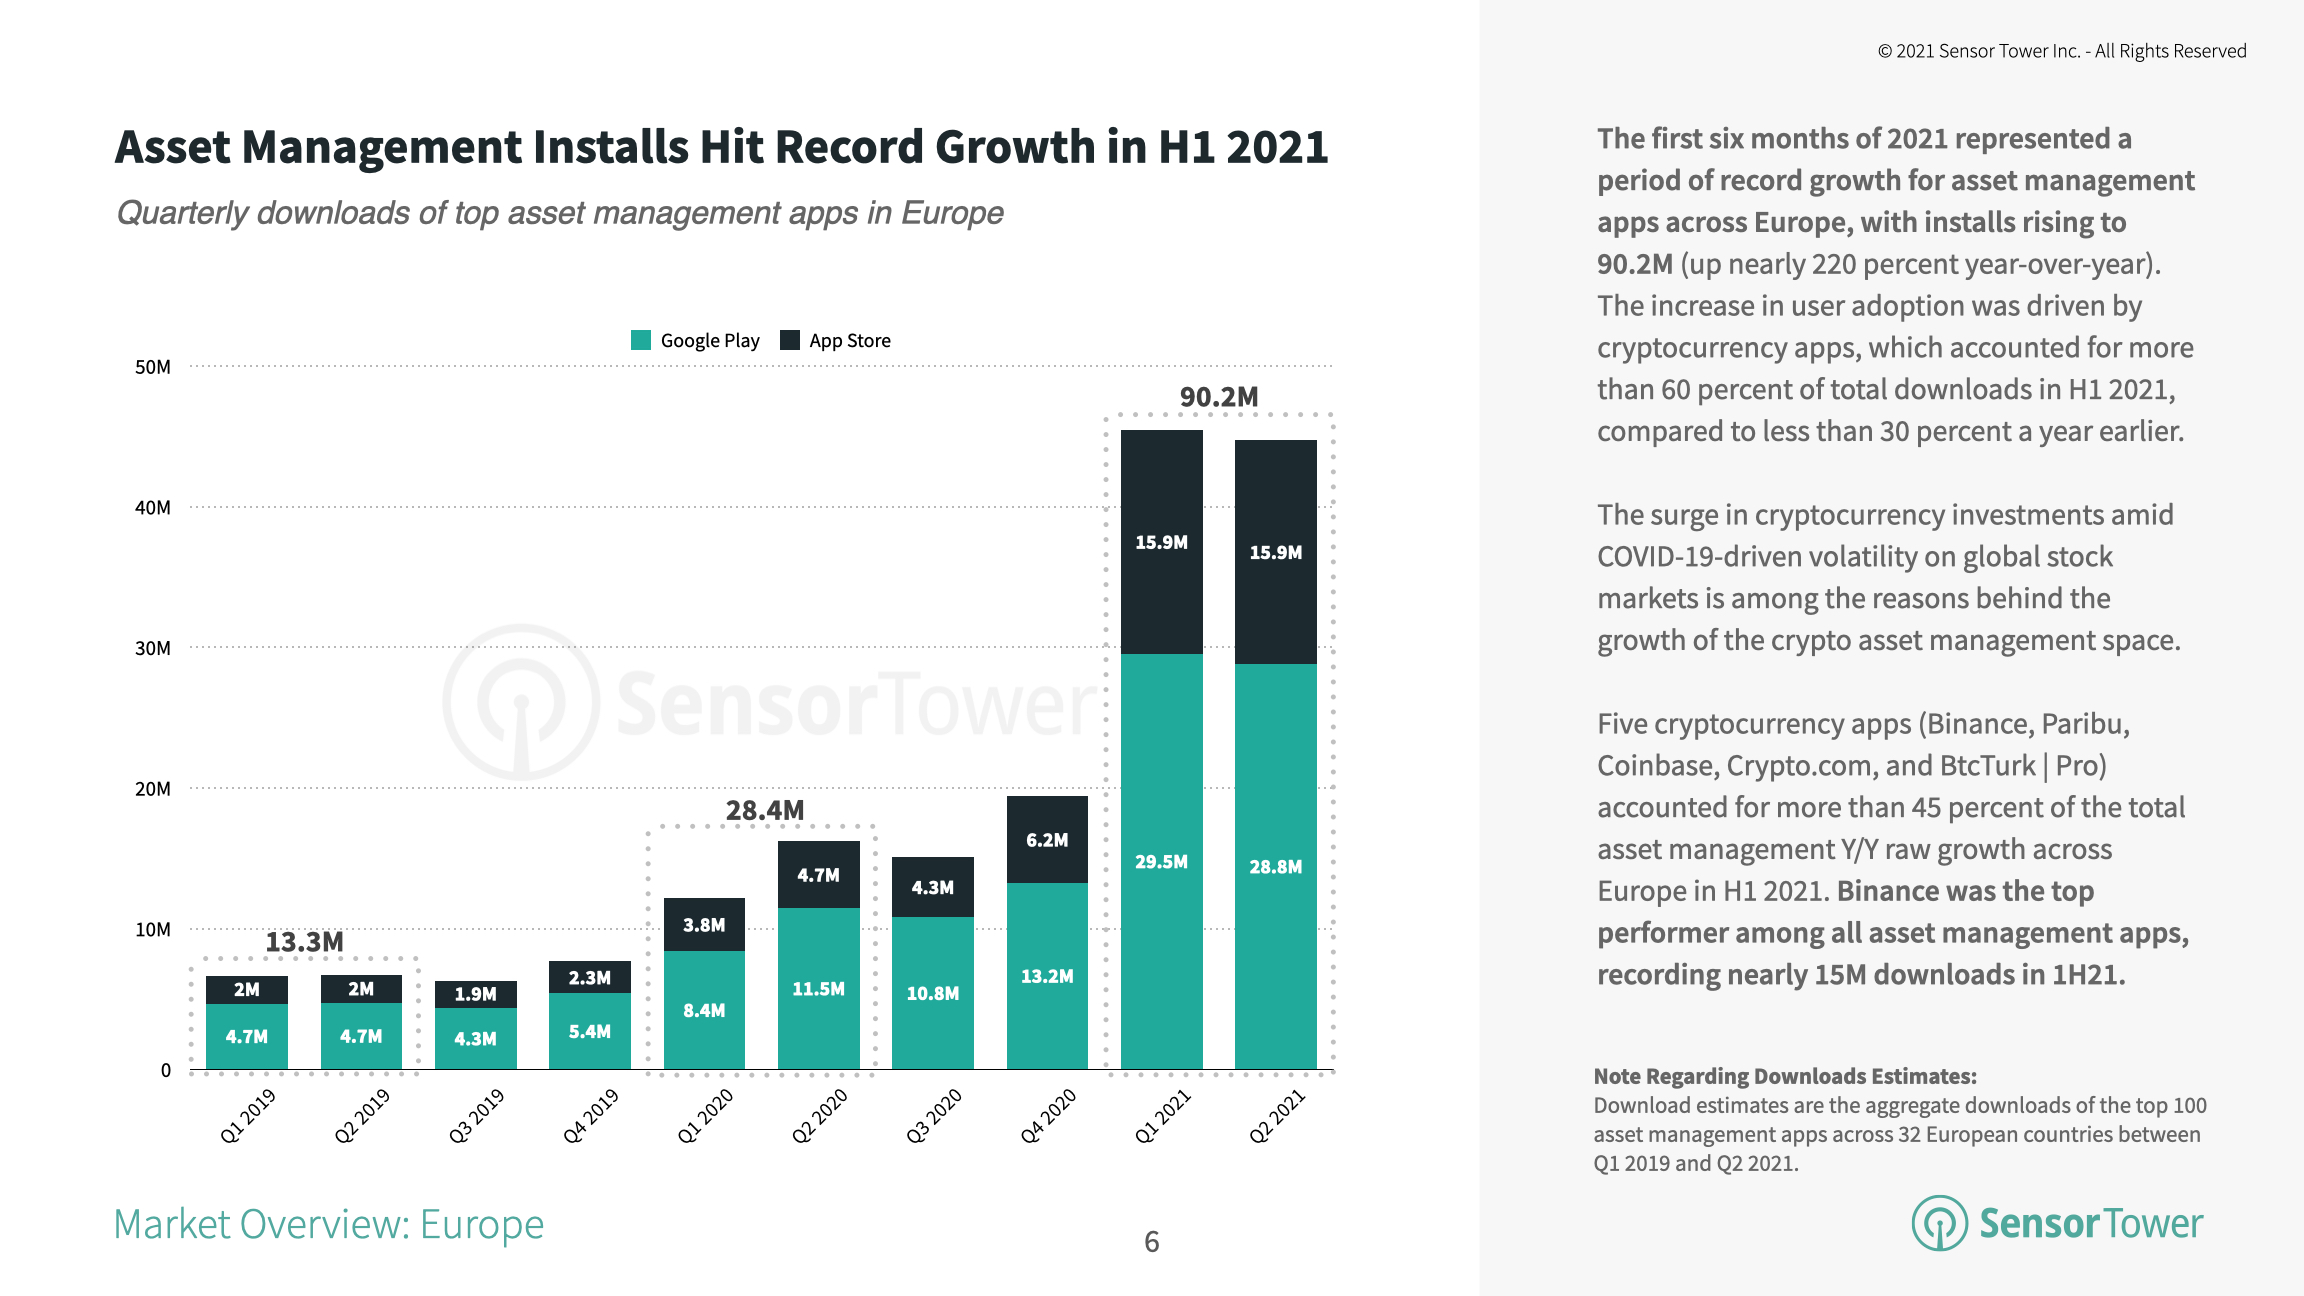 Installs of top asset management apps in Europe reached 90.2 million in H1 2021, up 218 percent year-over-year